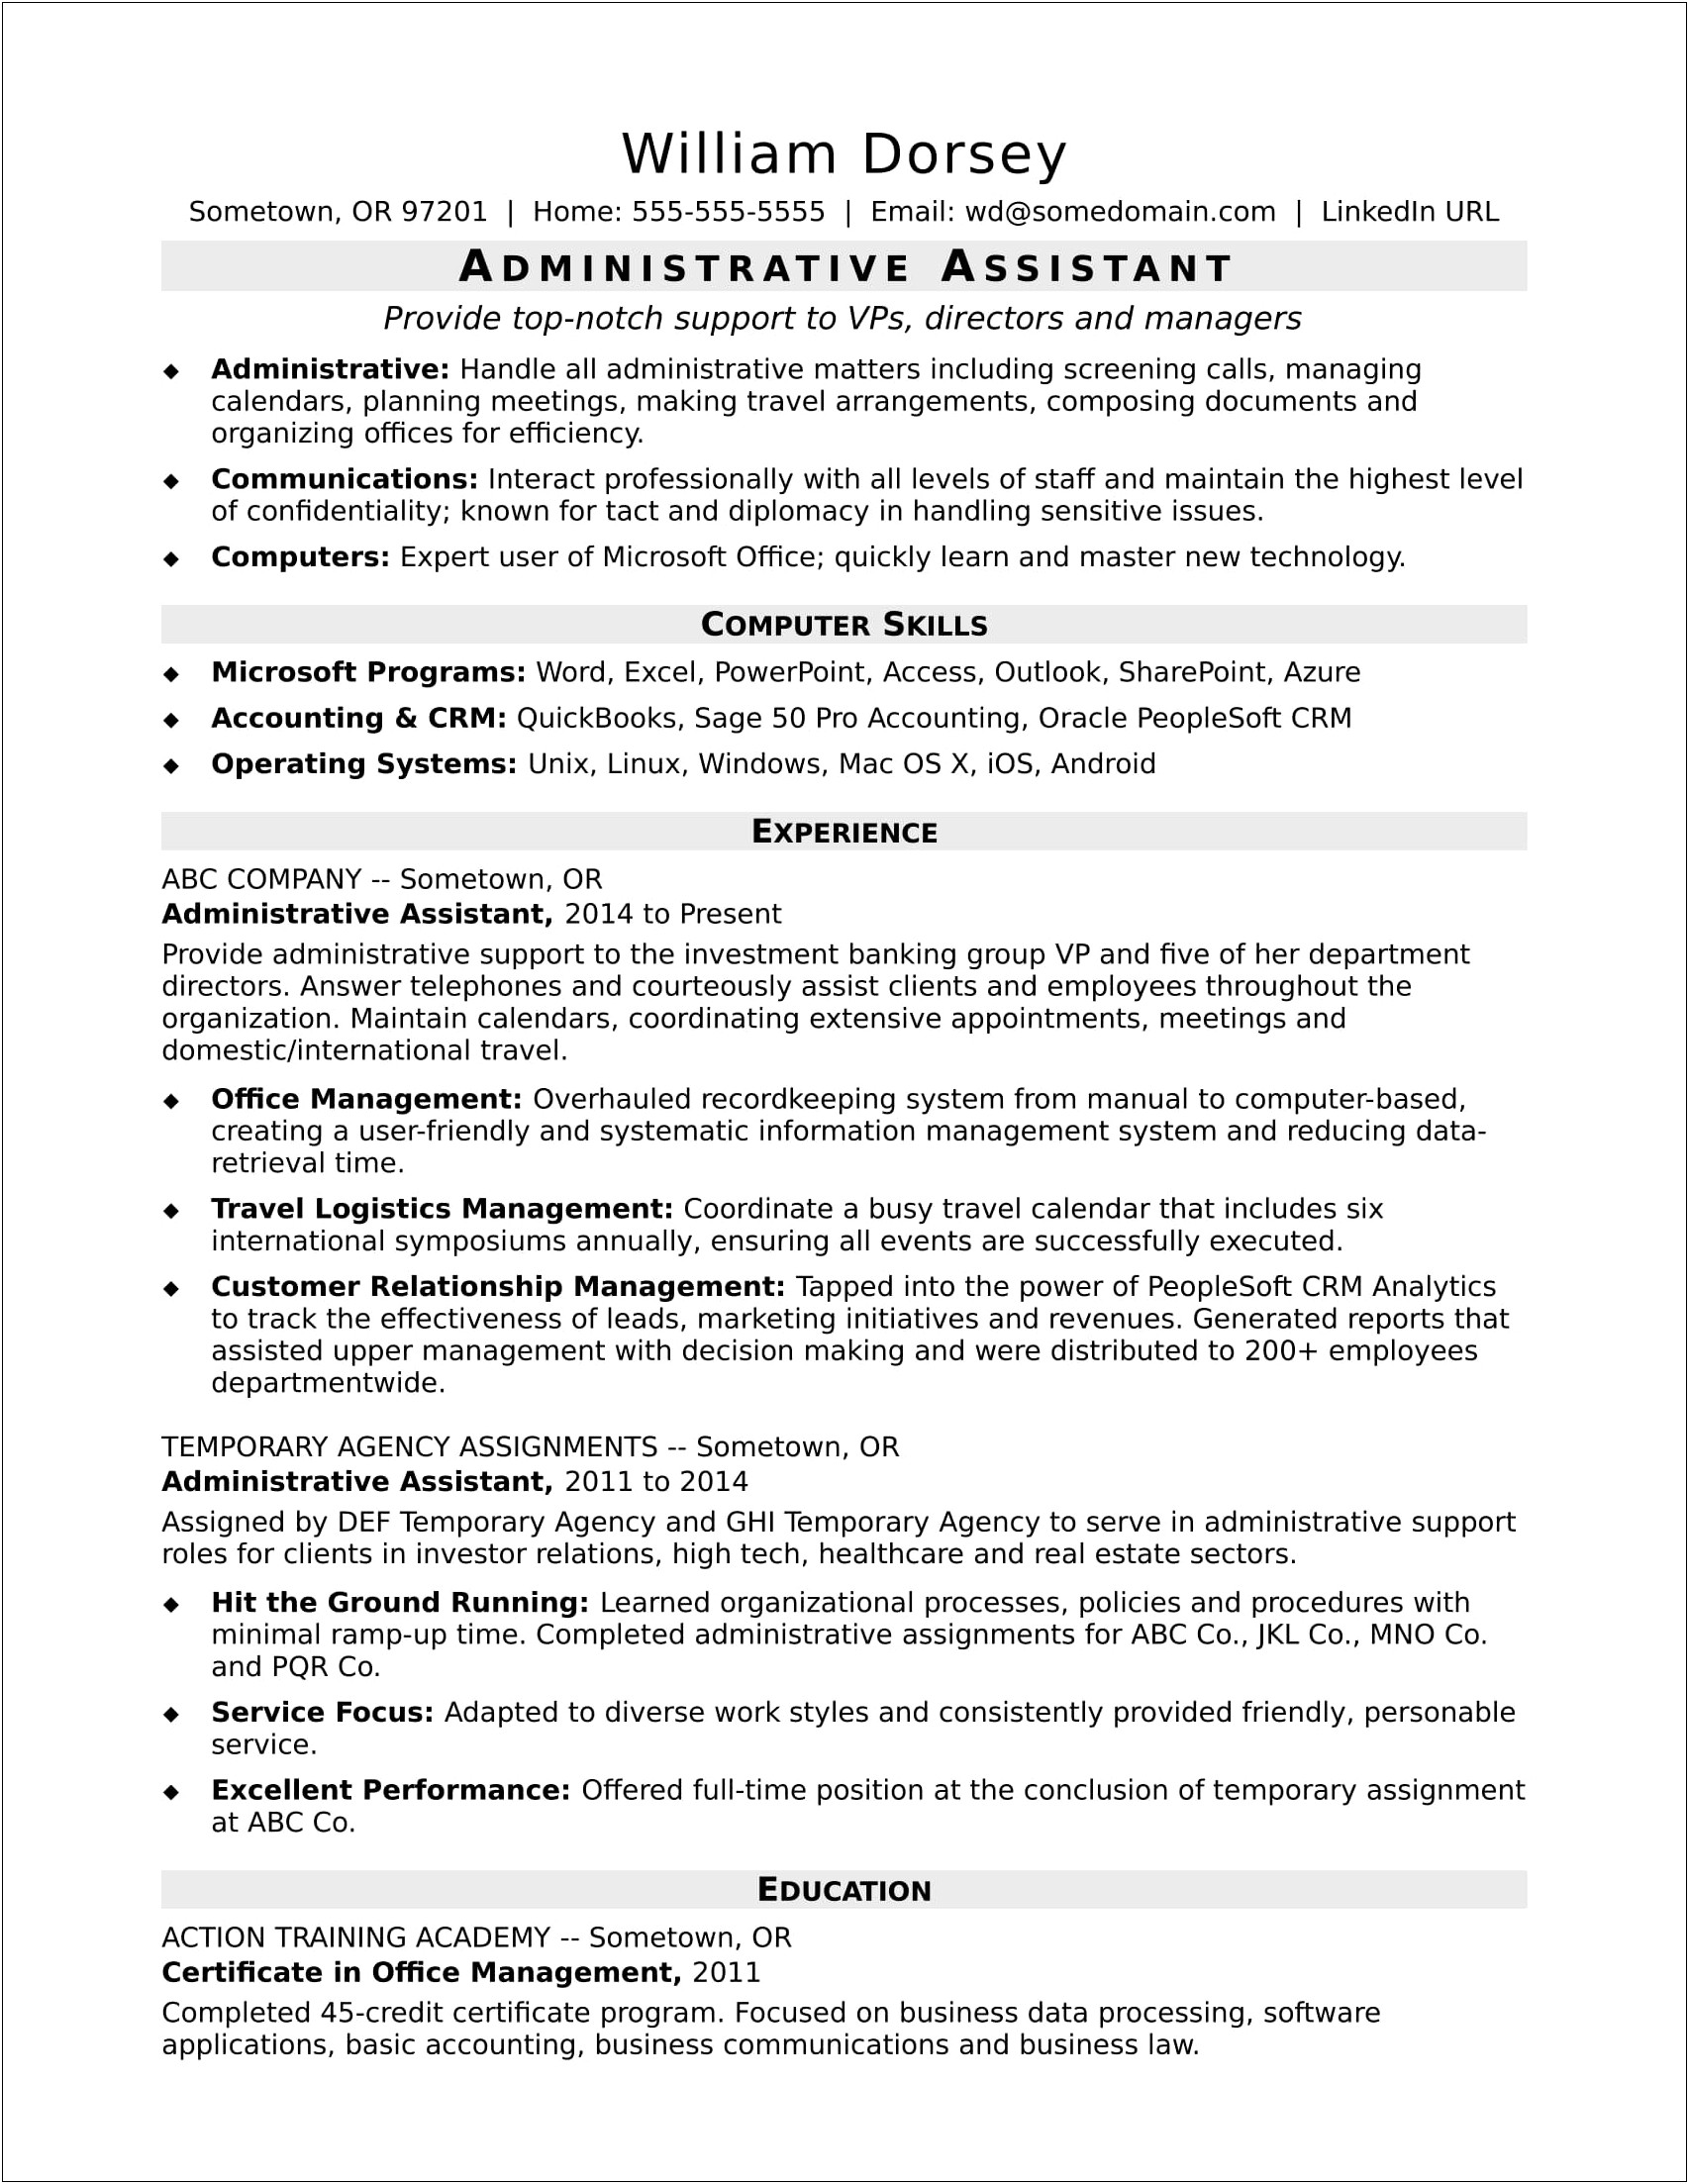 Samples Of Resumes For Office Manager